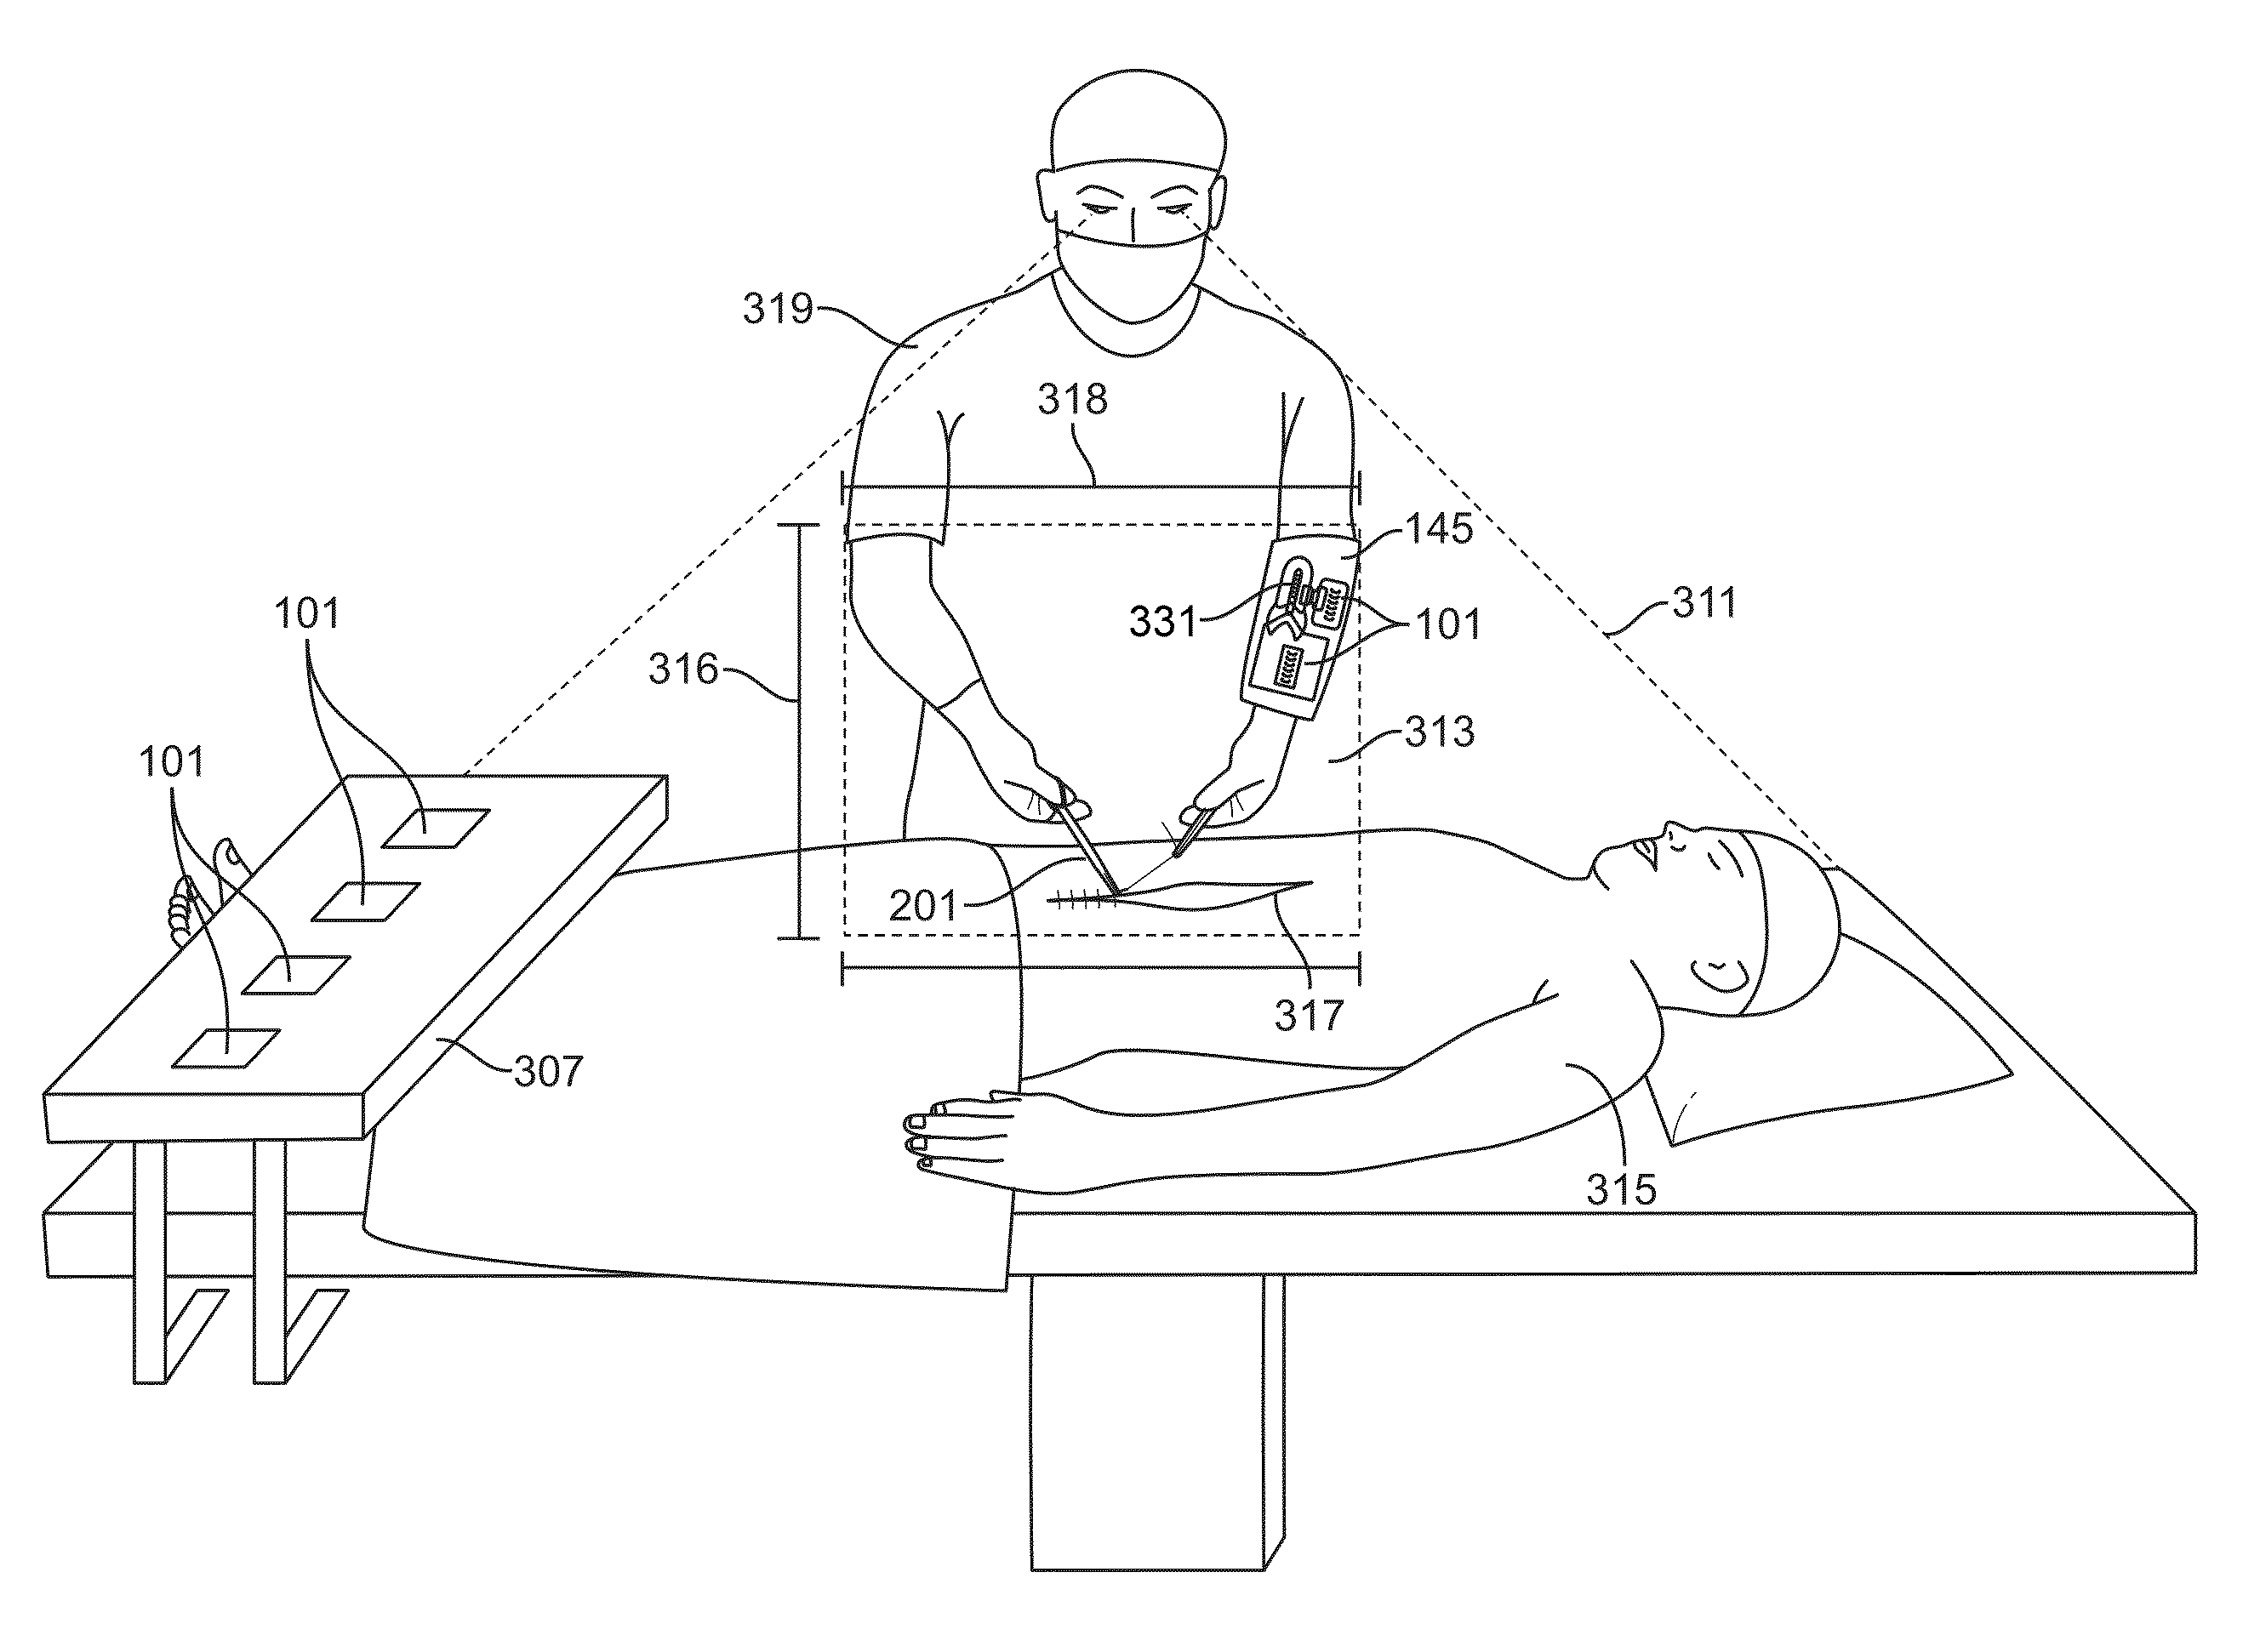 Systems and methods for increased operating room efficiency